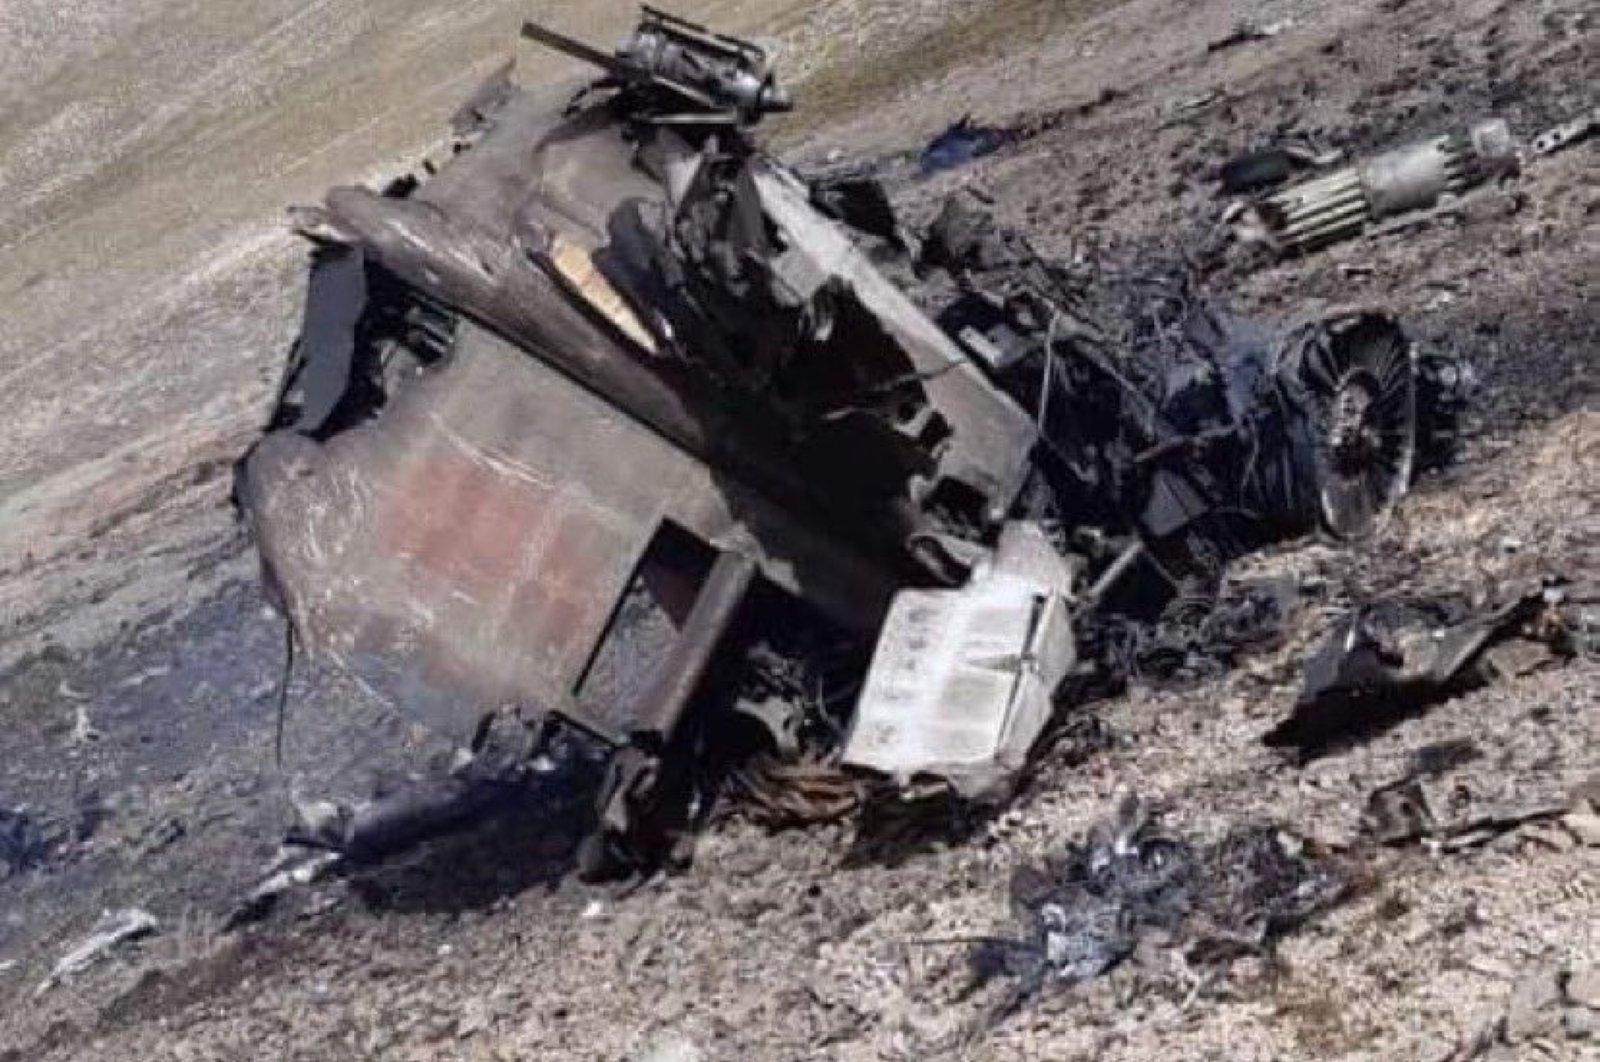 The remains of an Armenian Sukhoi Su-25 warplane that crashed into the mountains during fighting with Azerbaijan over the occupied Nagorny-Karabakh region, Azerbaijan, Sept. 30, 2020. (AFP)